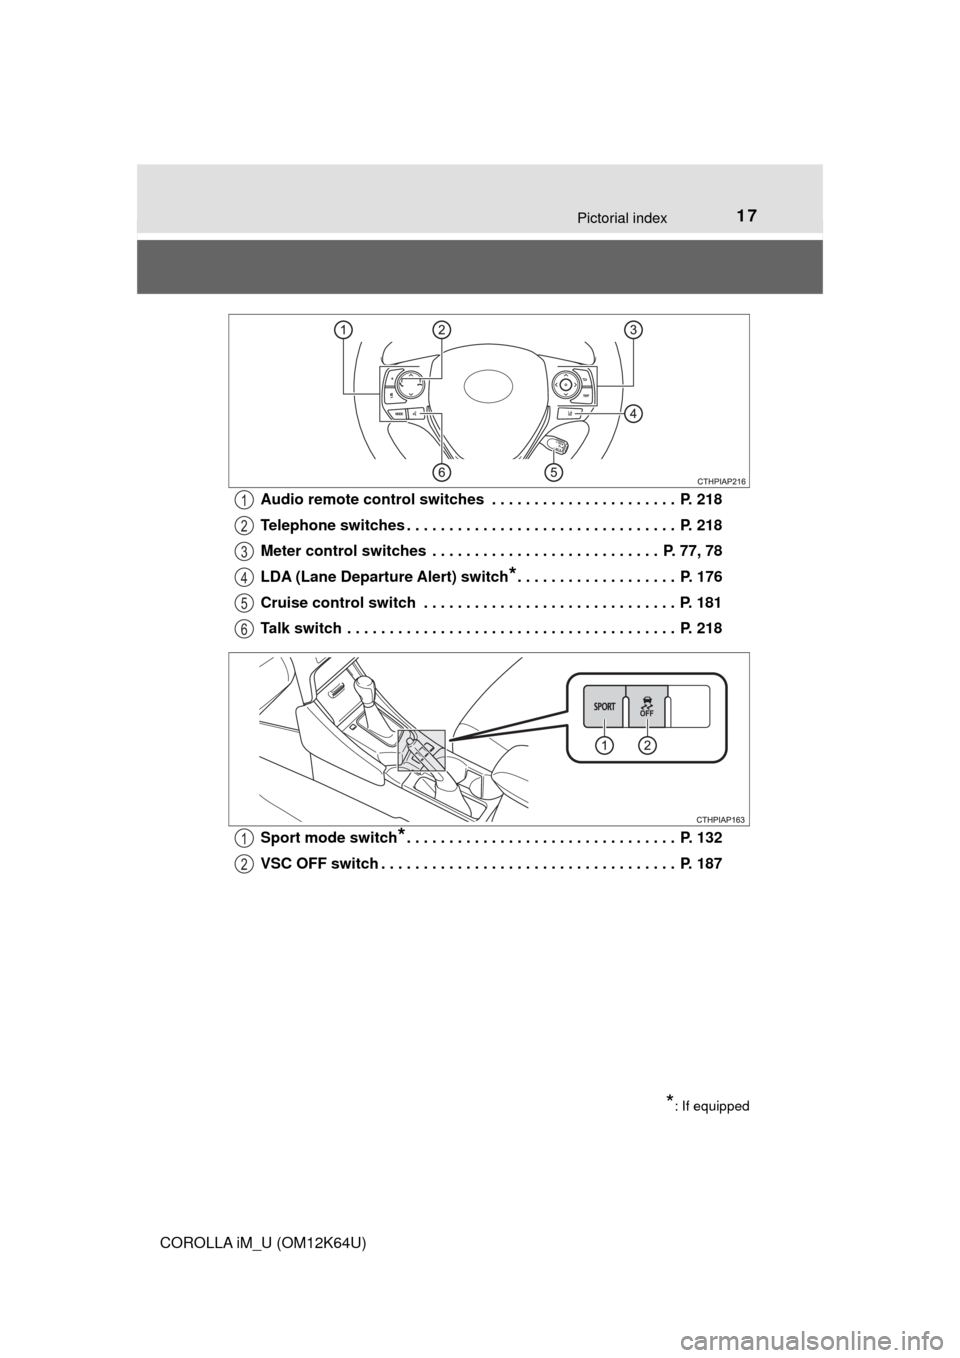 TOYOTA COROLLA iM 2017 11.G Owners Manual 17Pictorial index
COROLLA iM_U (OM12K64U)Audio remote control switches  . . . . . . . . . . . . . . . . . . . . . .  P. 218
Telephone switches . . . . . . . . . . . . . . . . . . . . . . . . . . . . .